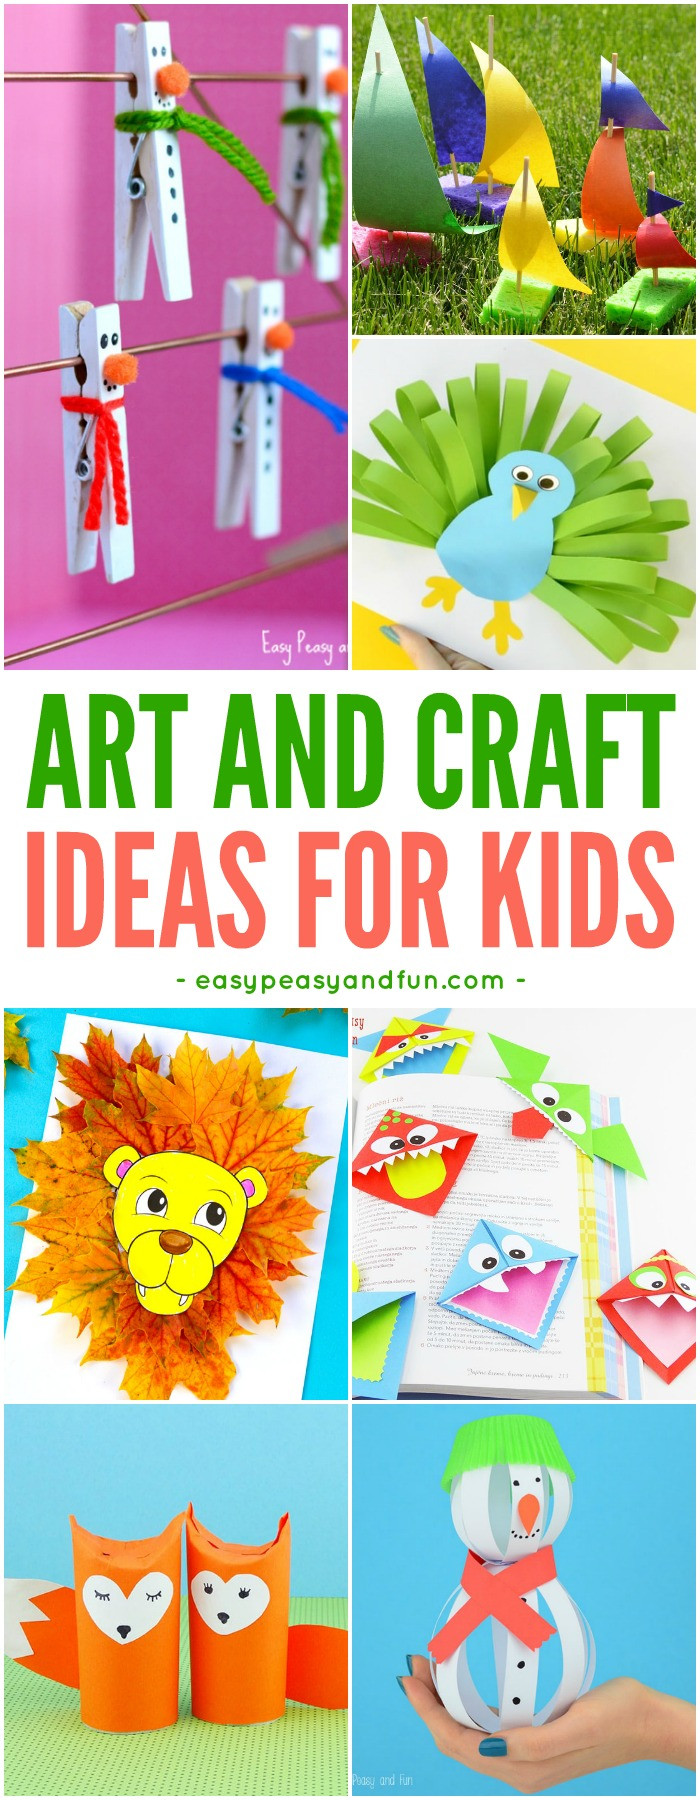 Arts And Crafts Projects For Toddlers
 Crafts For Kids Tons of Art and Craft Ideas for Kids to